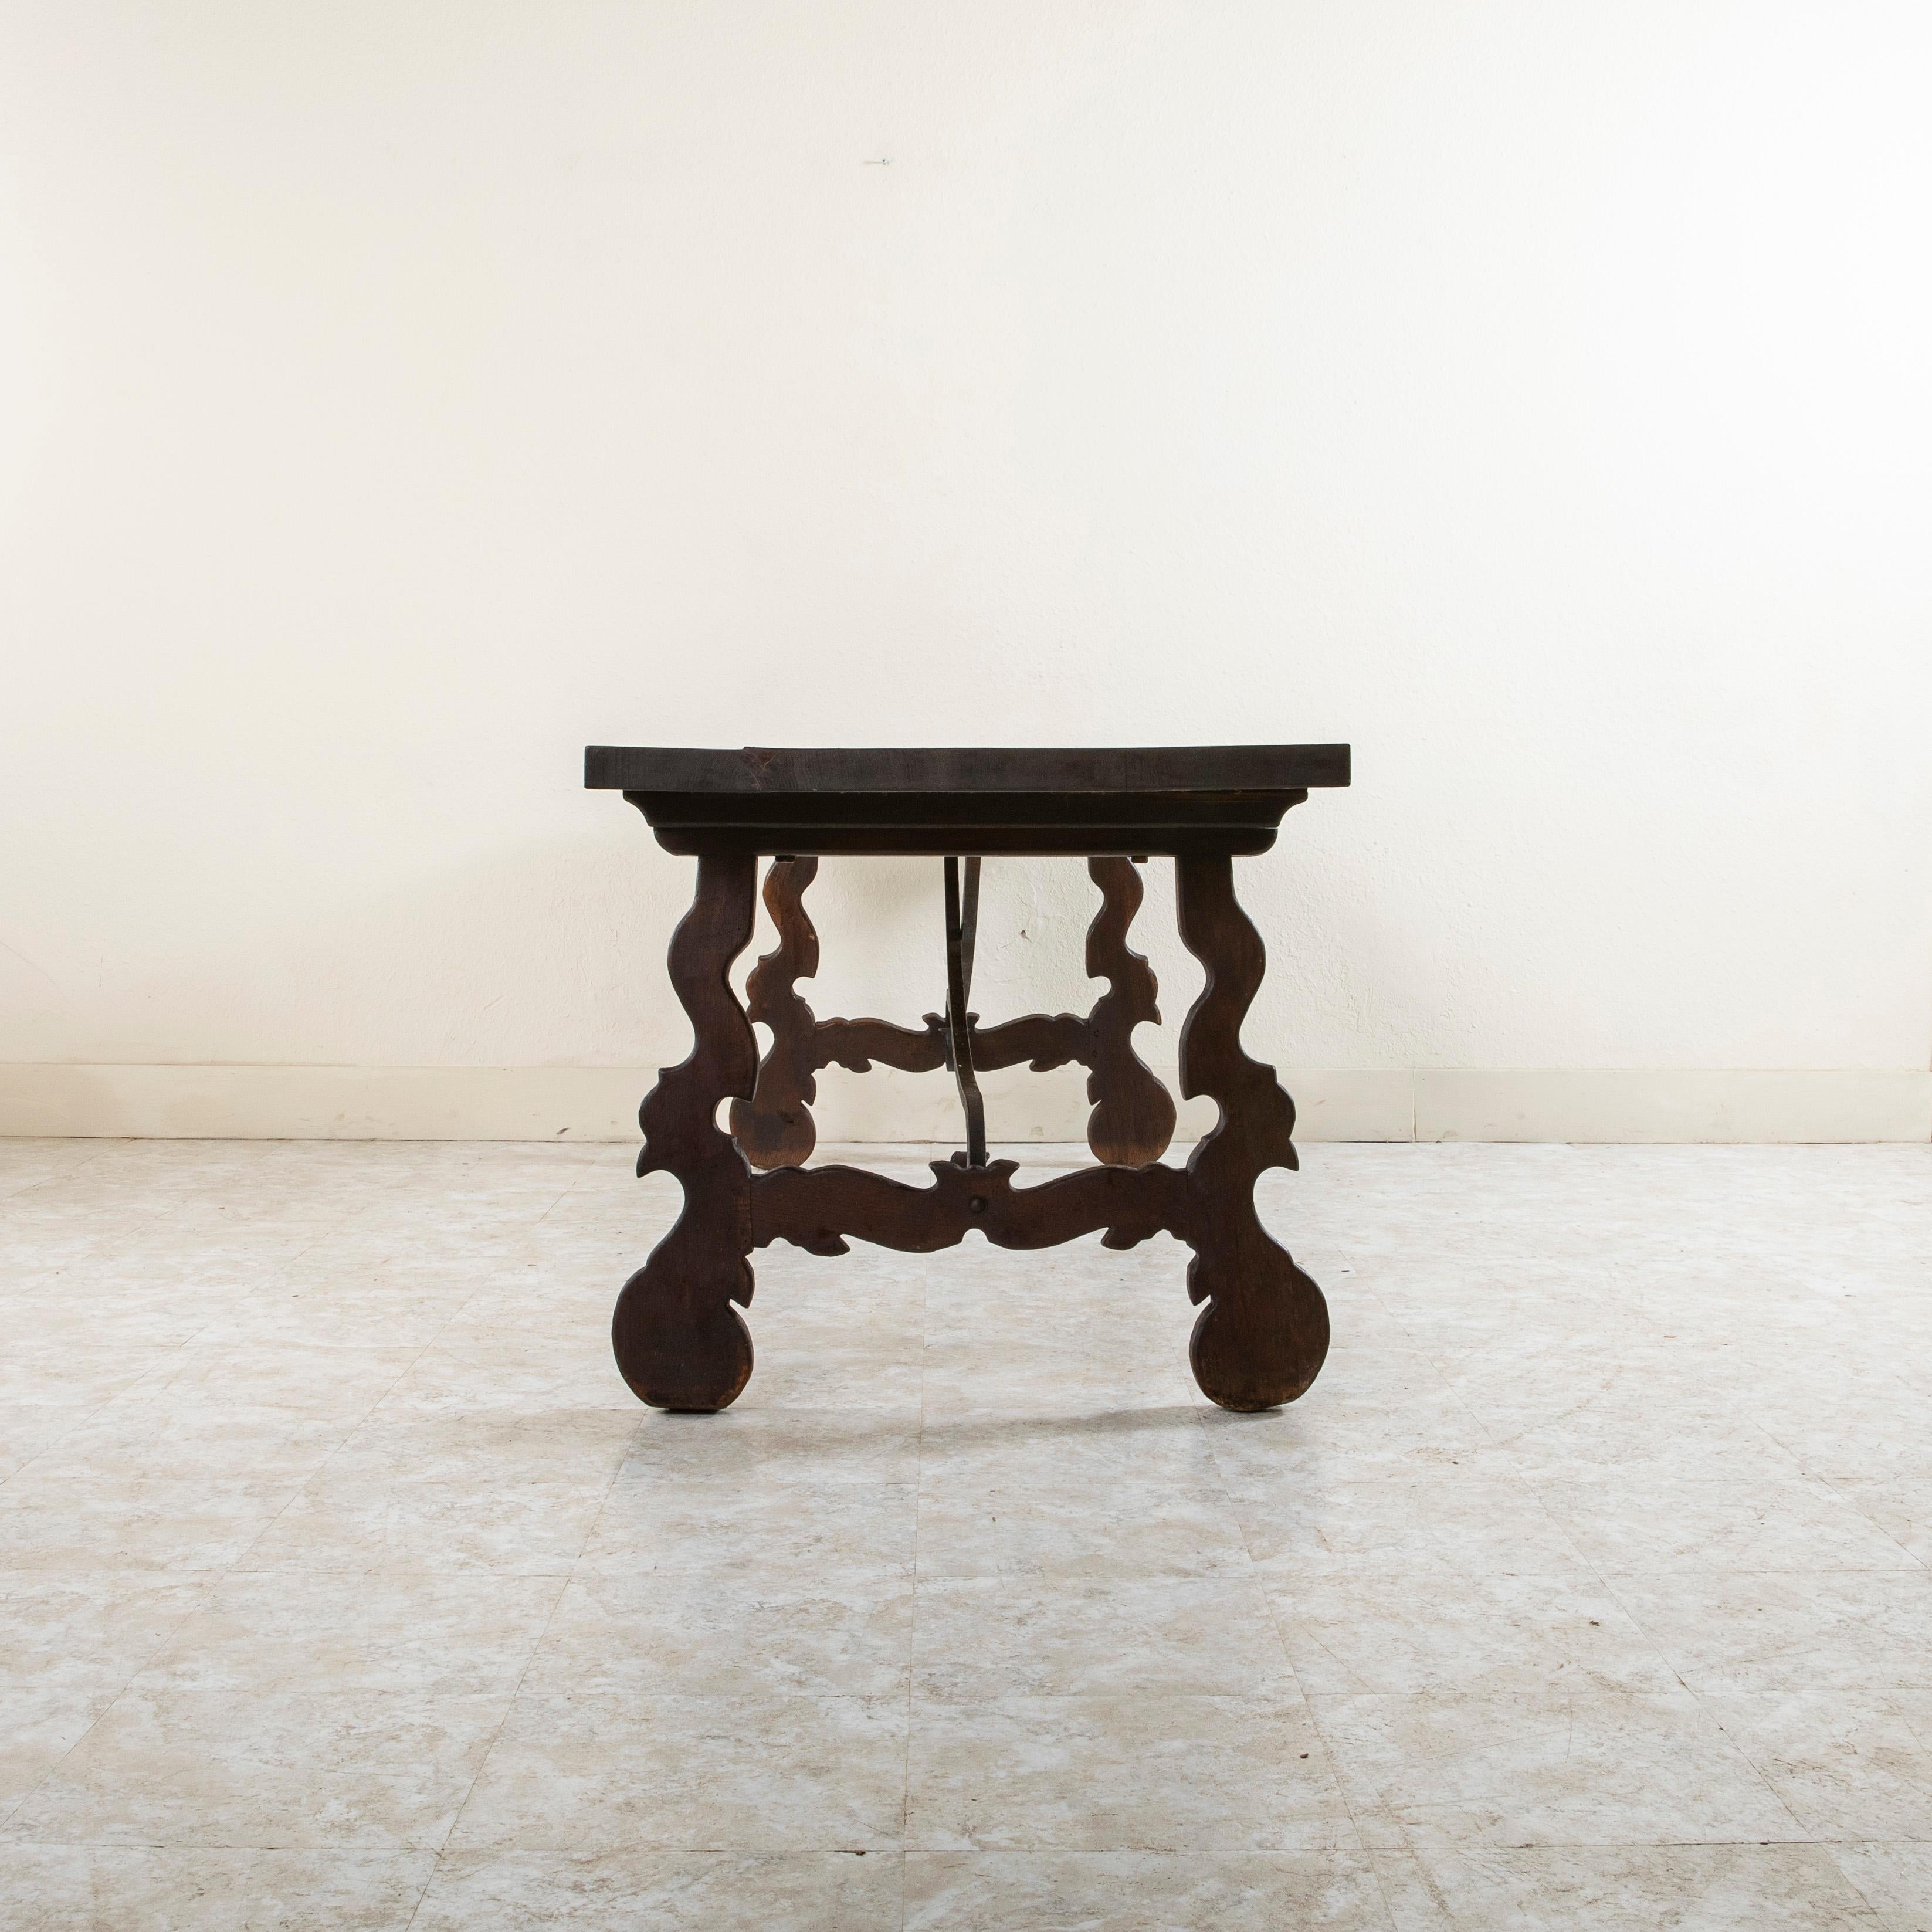 20th Century Spanish Renaissance Style Hand Hewn Oak Table, Forged Iron Stretcher circa 1900 For Sale